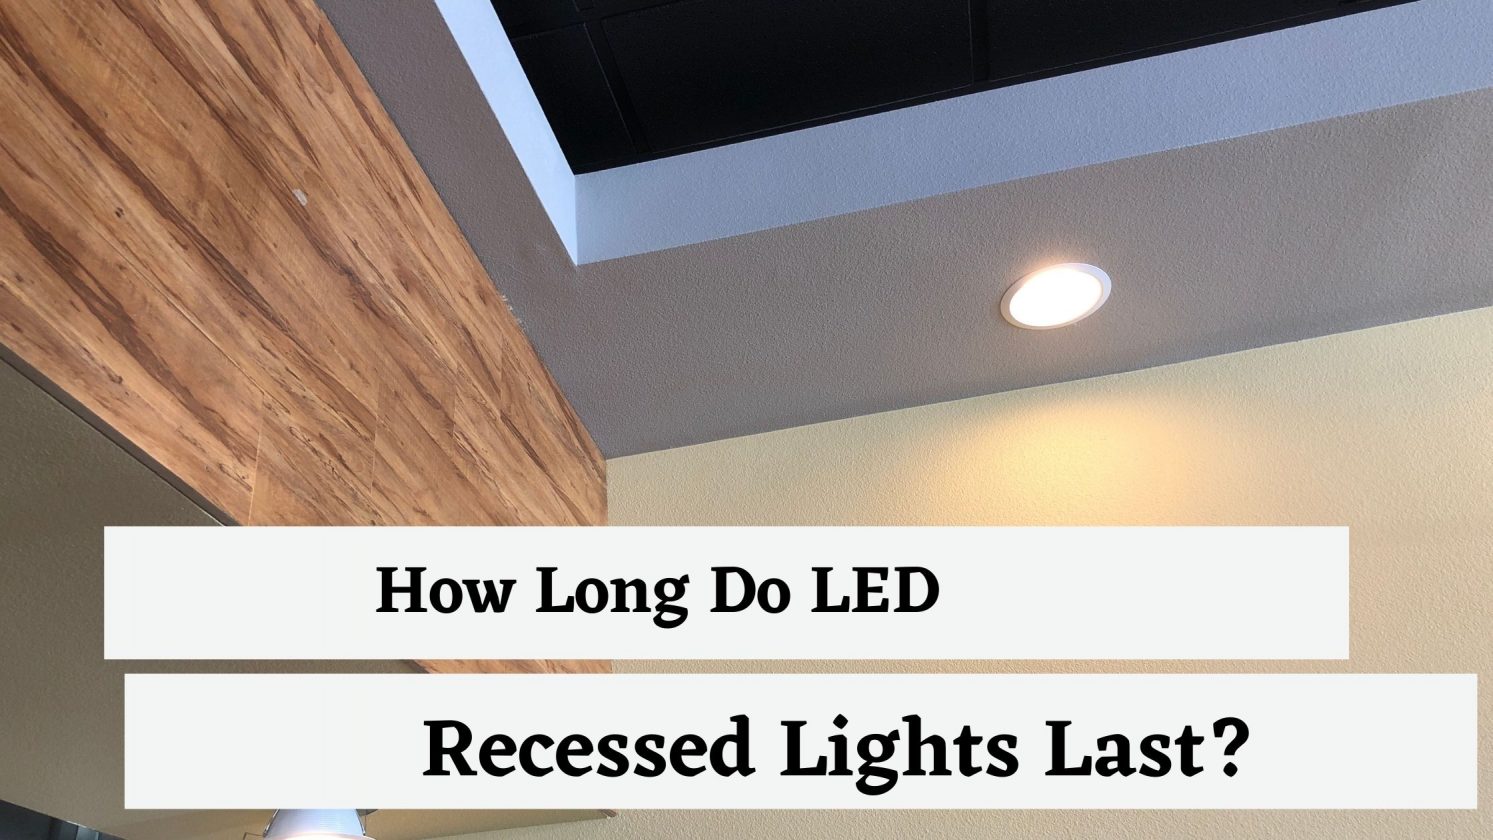 How Long Do LED Recessed Lights Last?